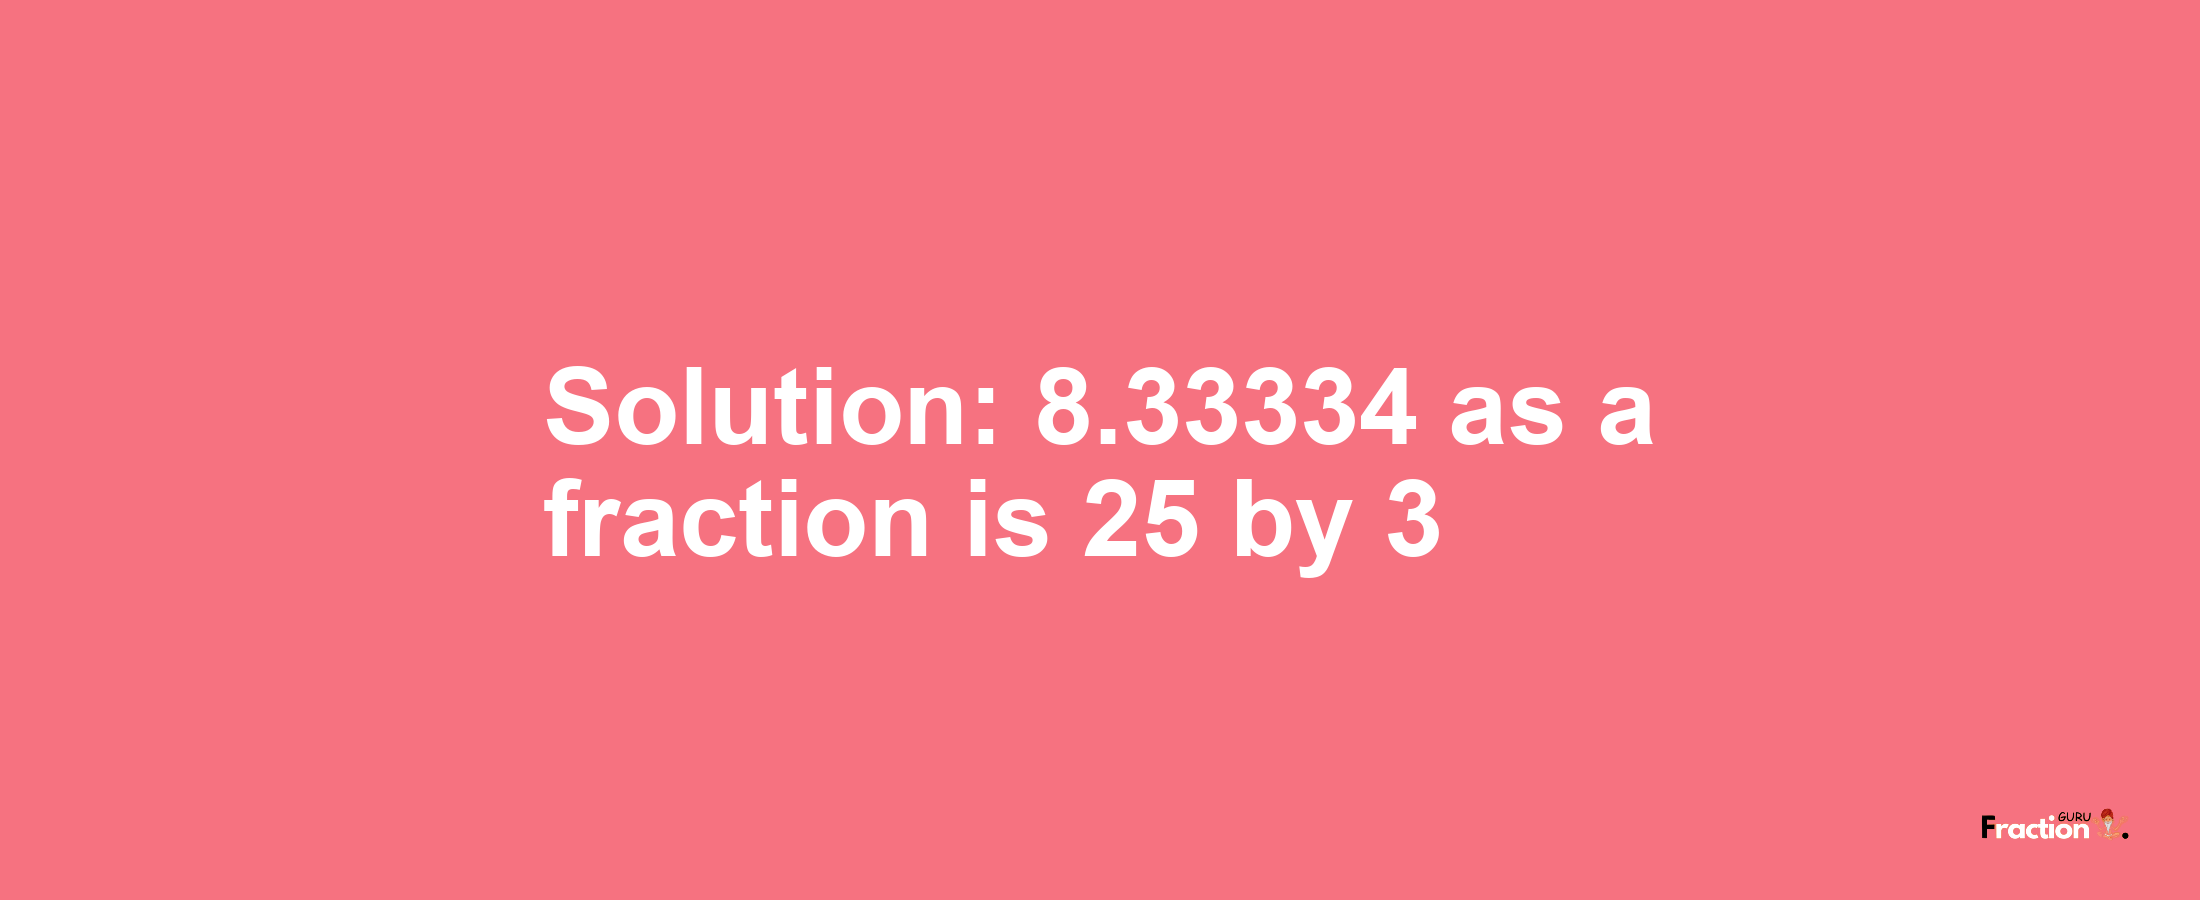 Solution:8.33334 as a fraction is 25/3